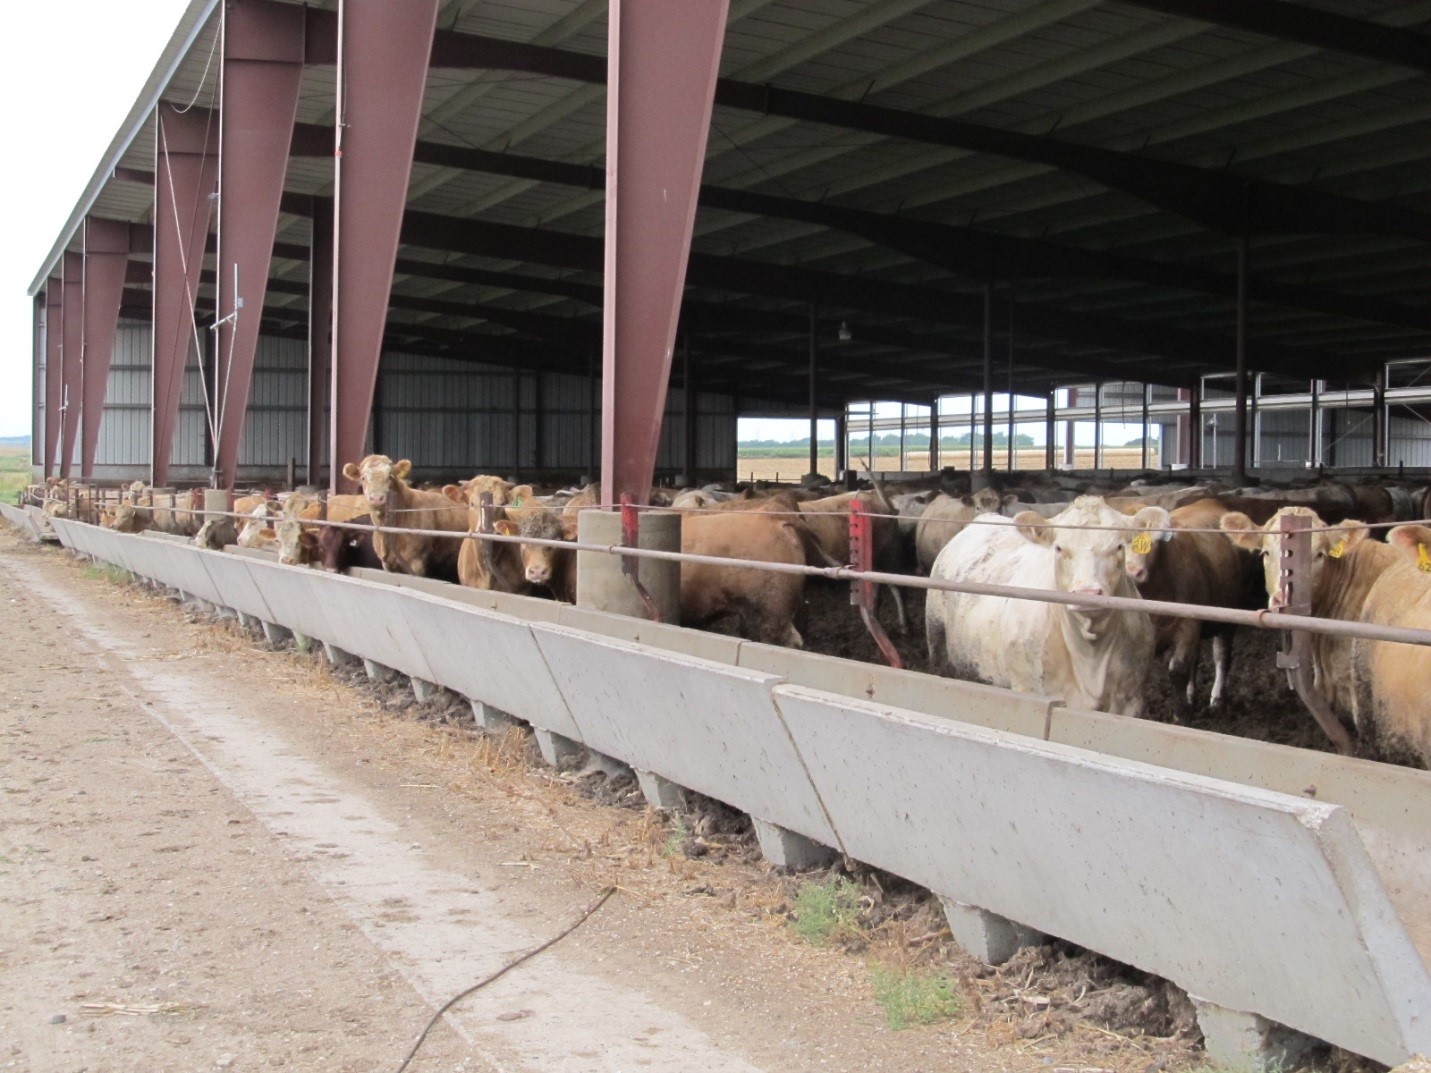 Confined beef cattle operations for more than 200 head may be subject to ammonia emissions reporting requirements under CERCLA and EPCRA.